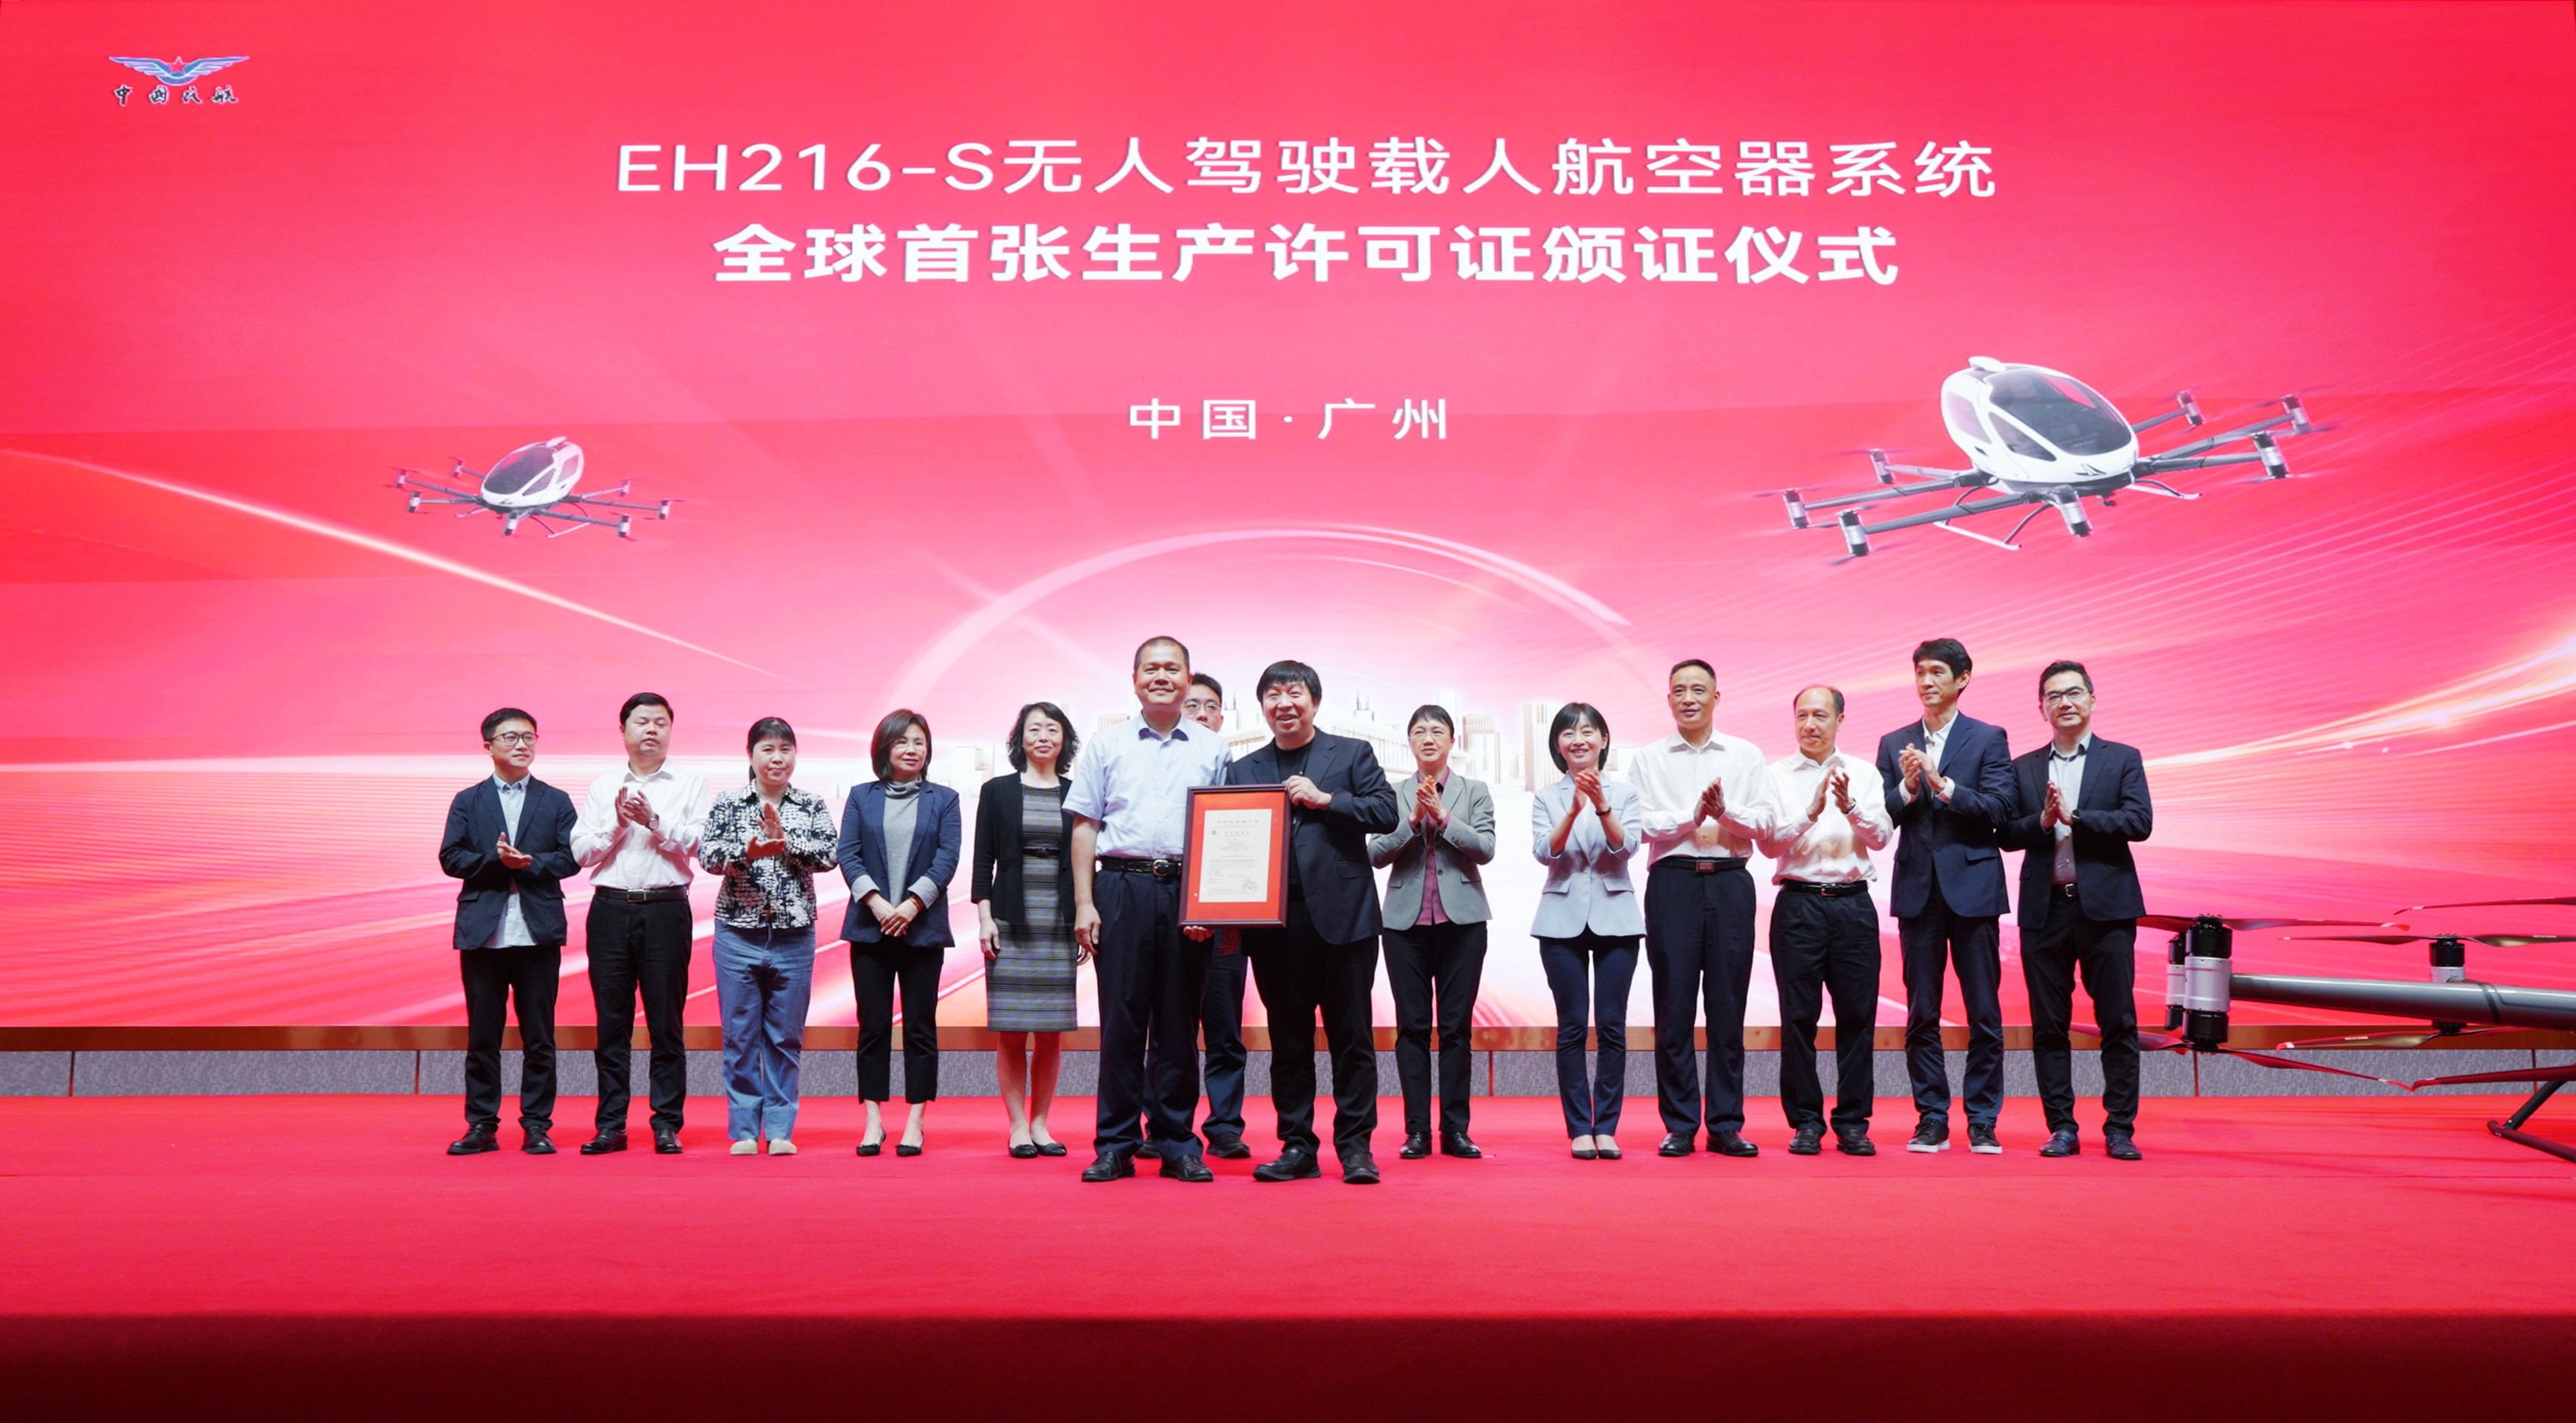 EHang Secures Production Certificate from CAAC, Clearing Path for Mass Production of EH216-S Pilotless eVTOL Aircraft